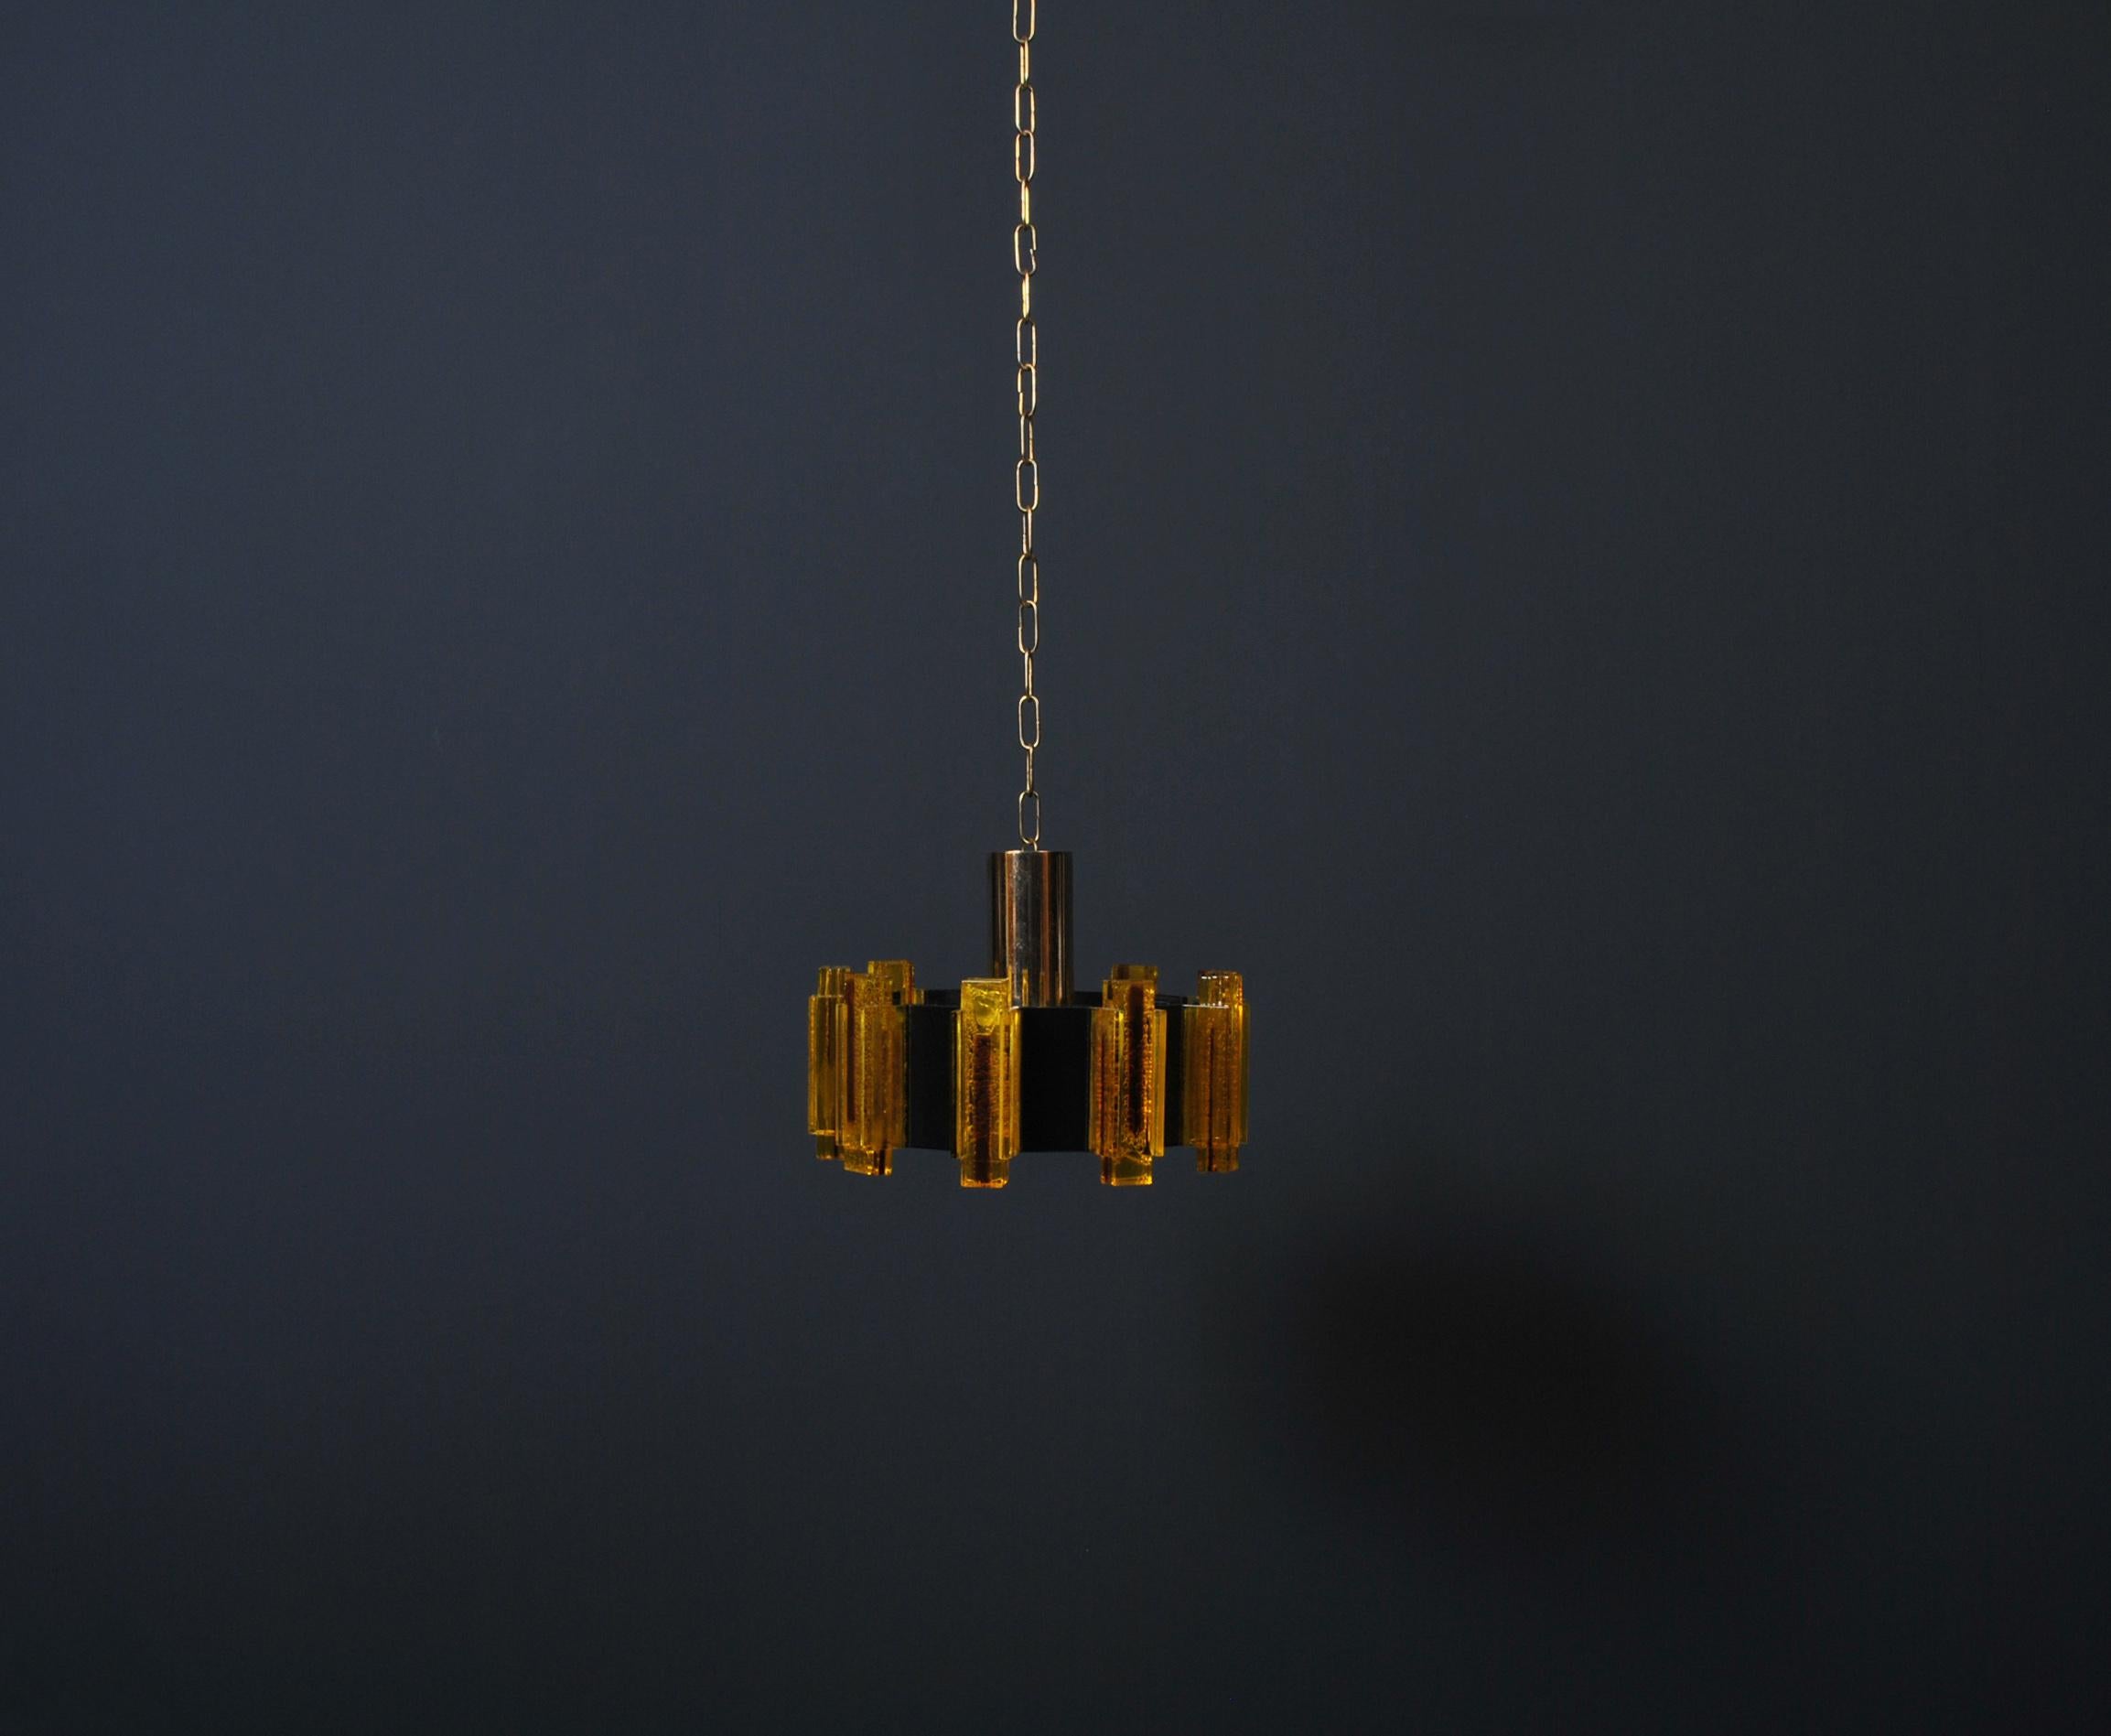 Scandinavian Danish Midcentury Pendant by Claus Bolby for Cebo